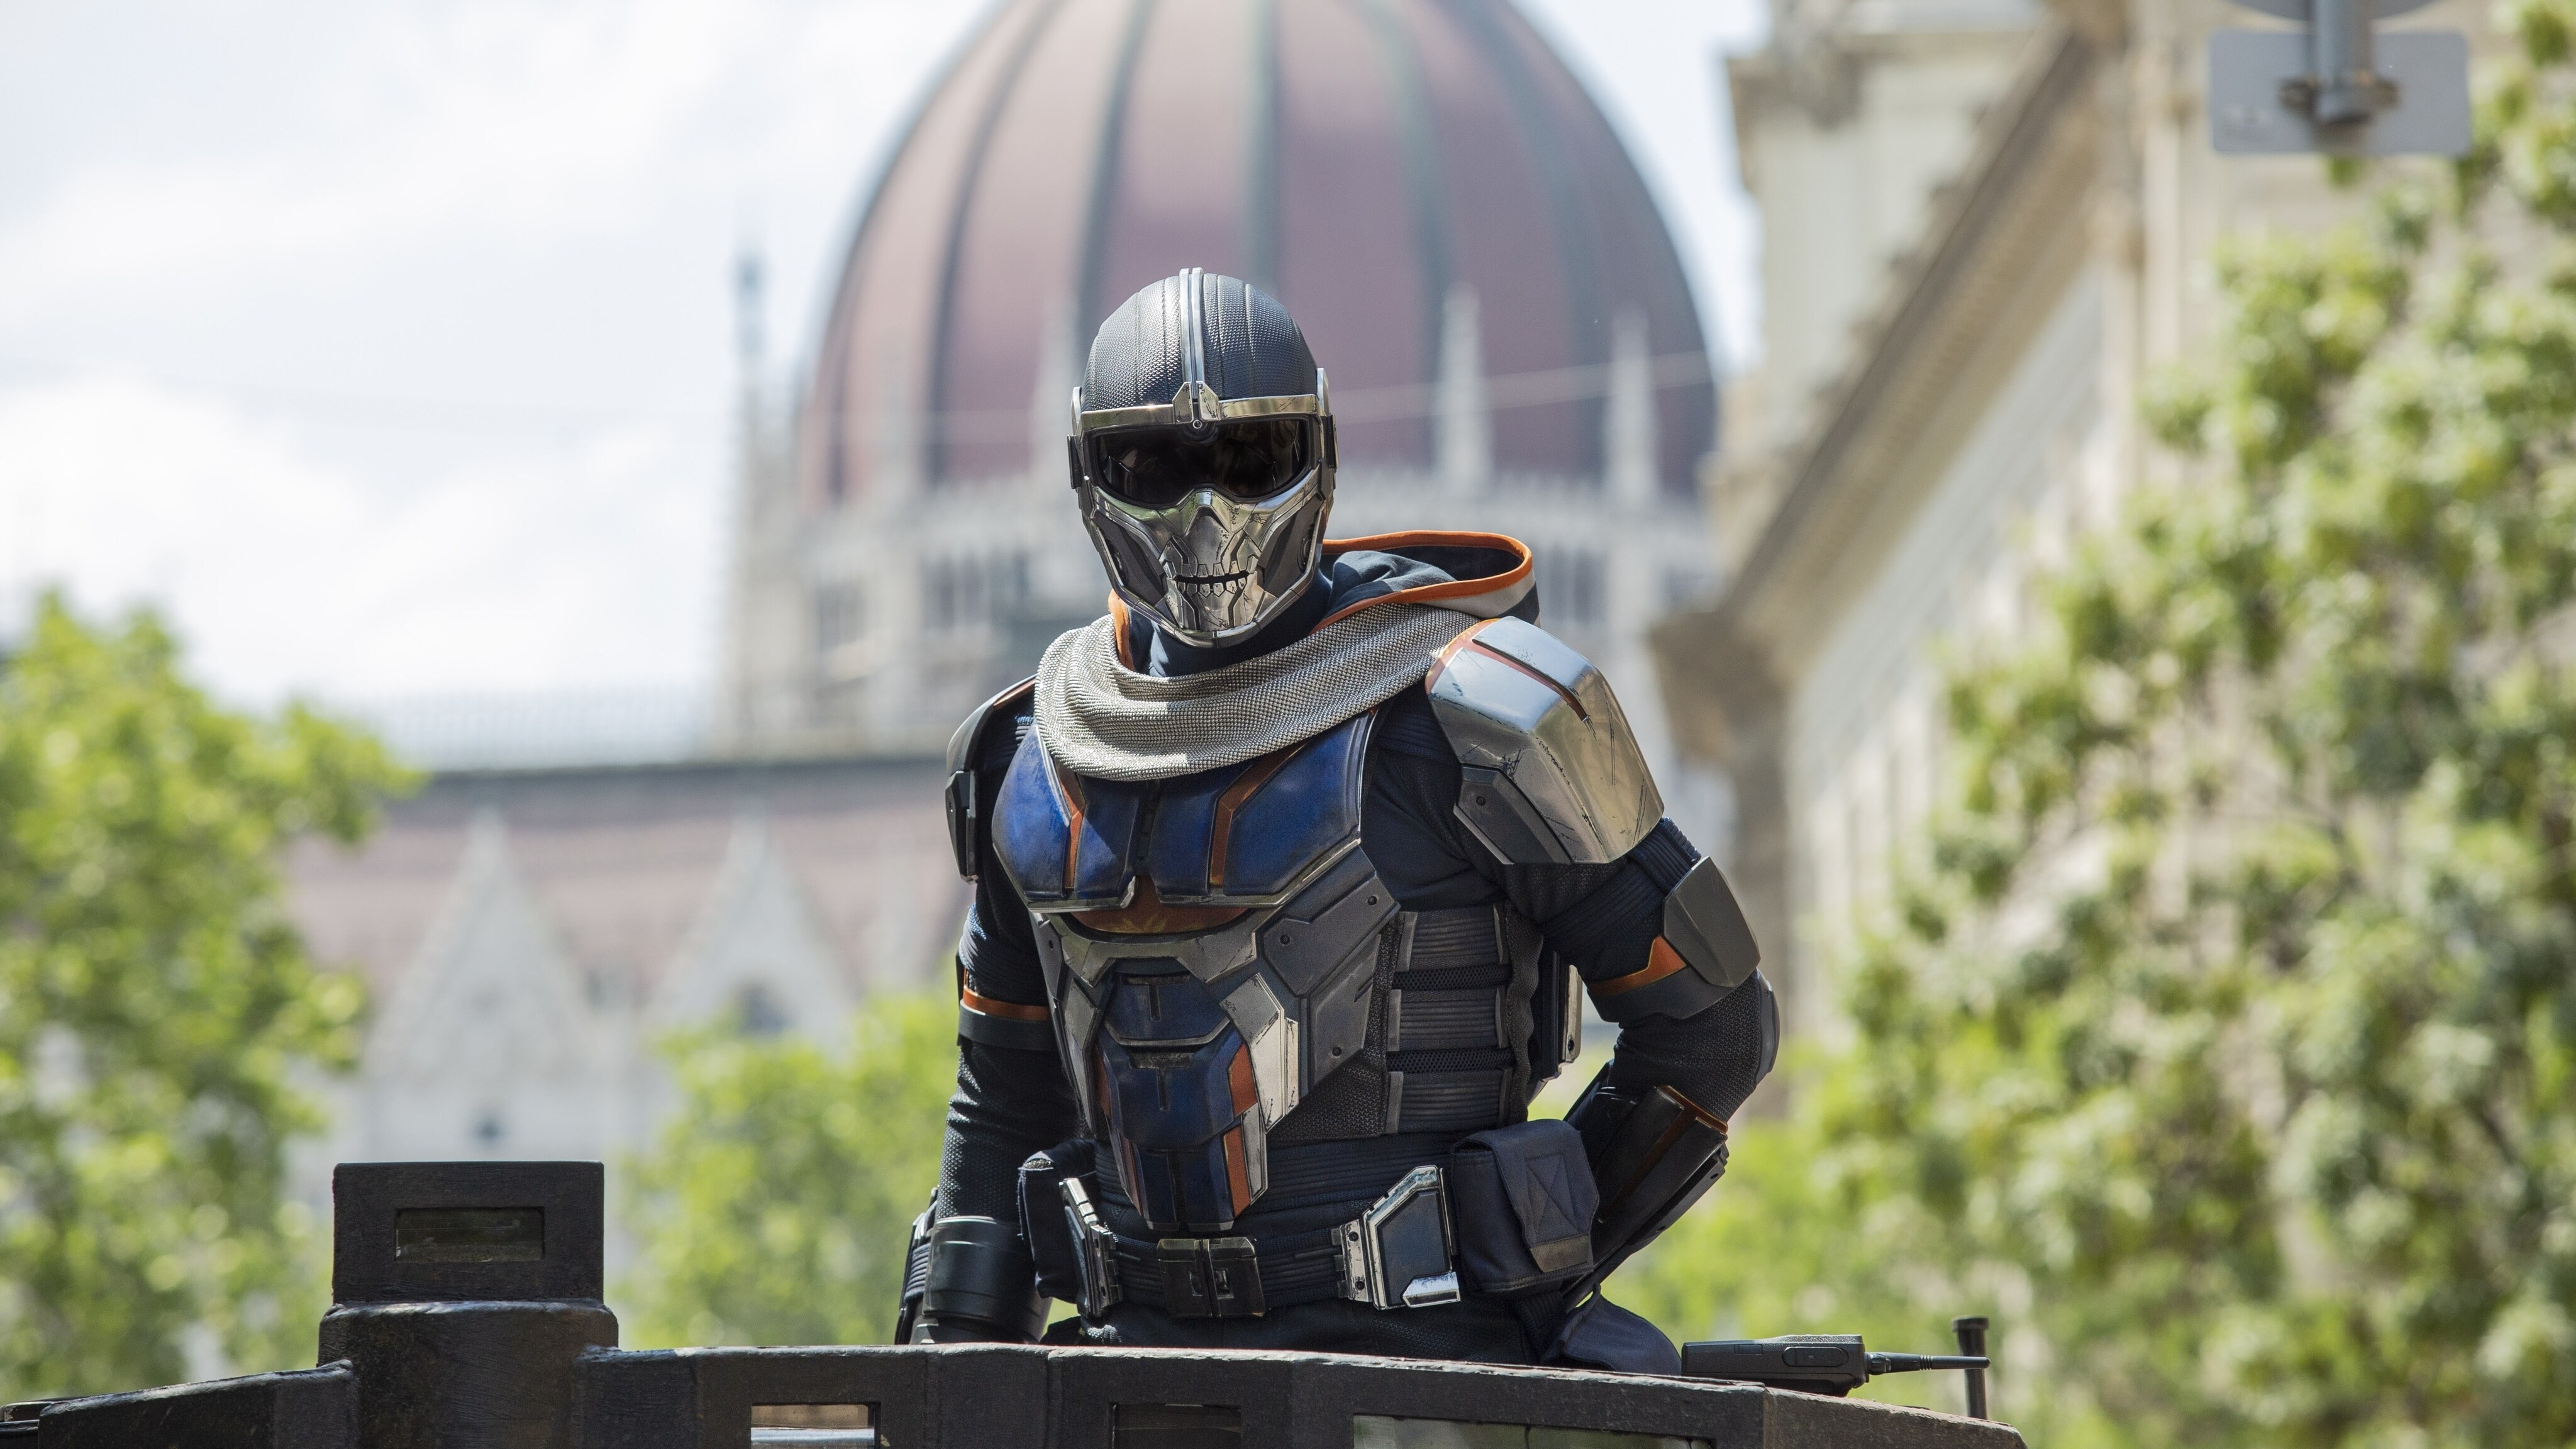 Taskmaster in Marvel Studios' BLACK WIDOW, in theaters and on Disney+ with Premier Access. Photo by Adrienn Szabo. ©Marvel Studios 2021. All Rights Reserved.